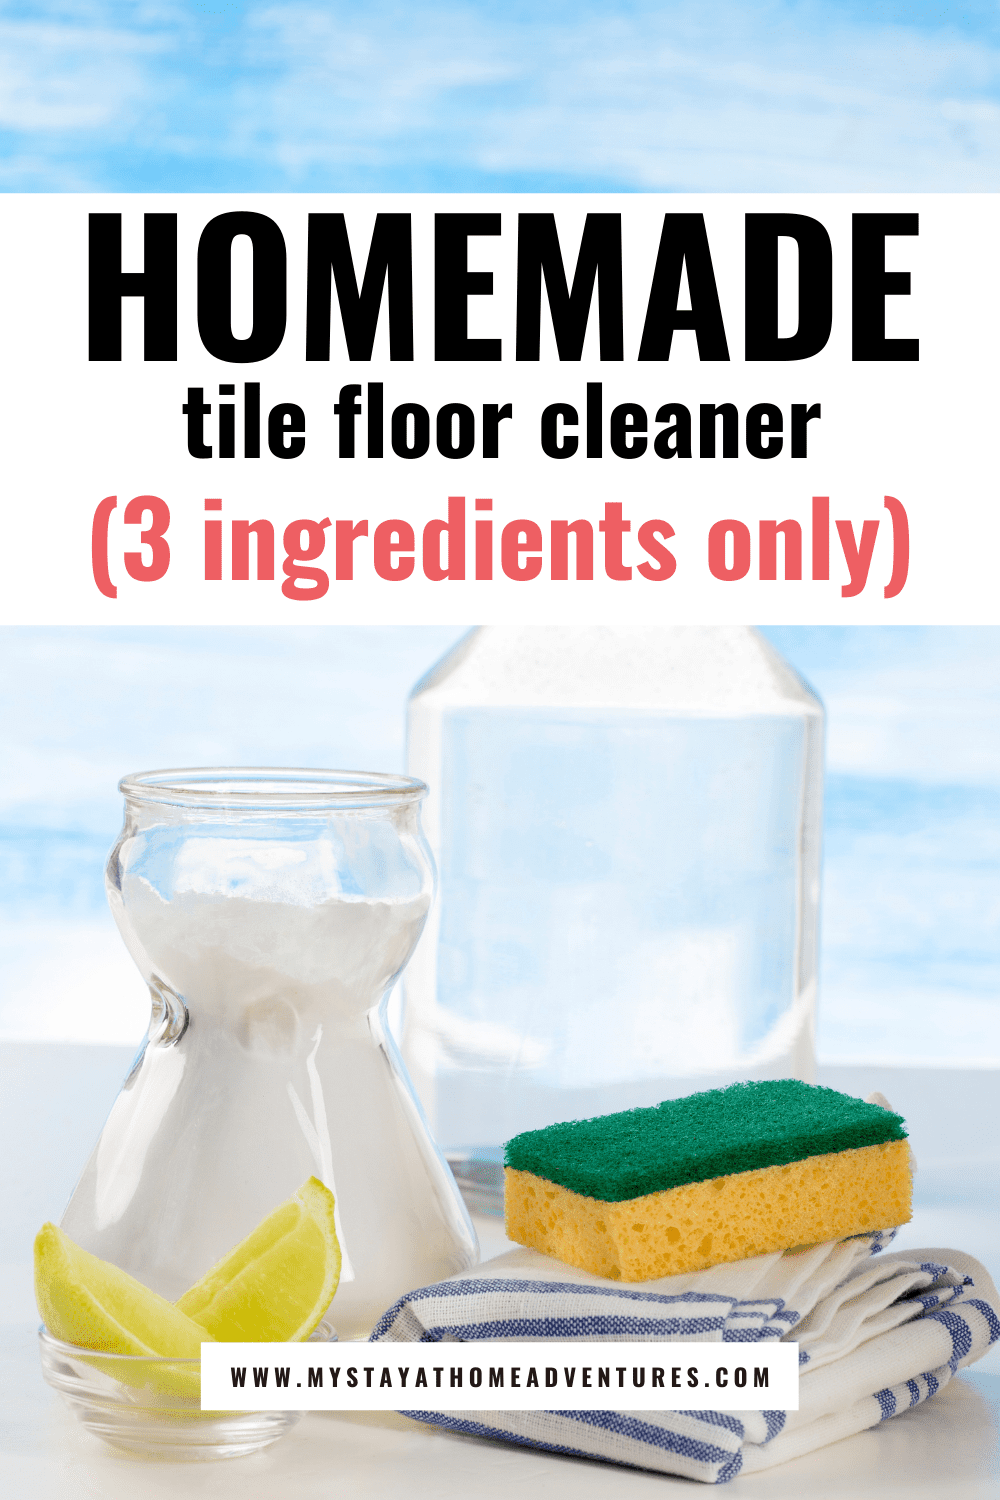 This homemade tile floor cleaner will get your floors clean and save you money. Learn how to make this 3 ingredient DIY floor cleaner. via @mystayathome